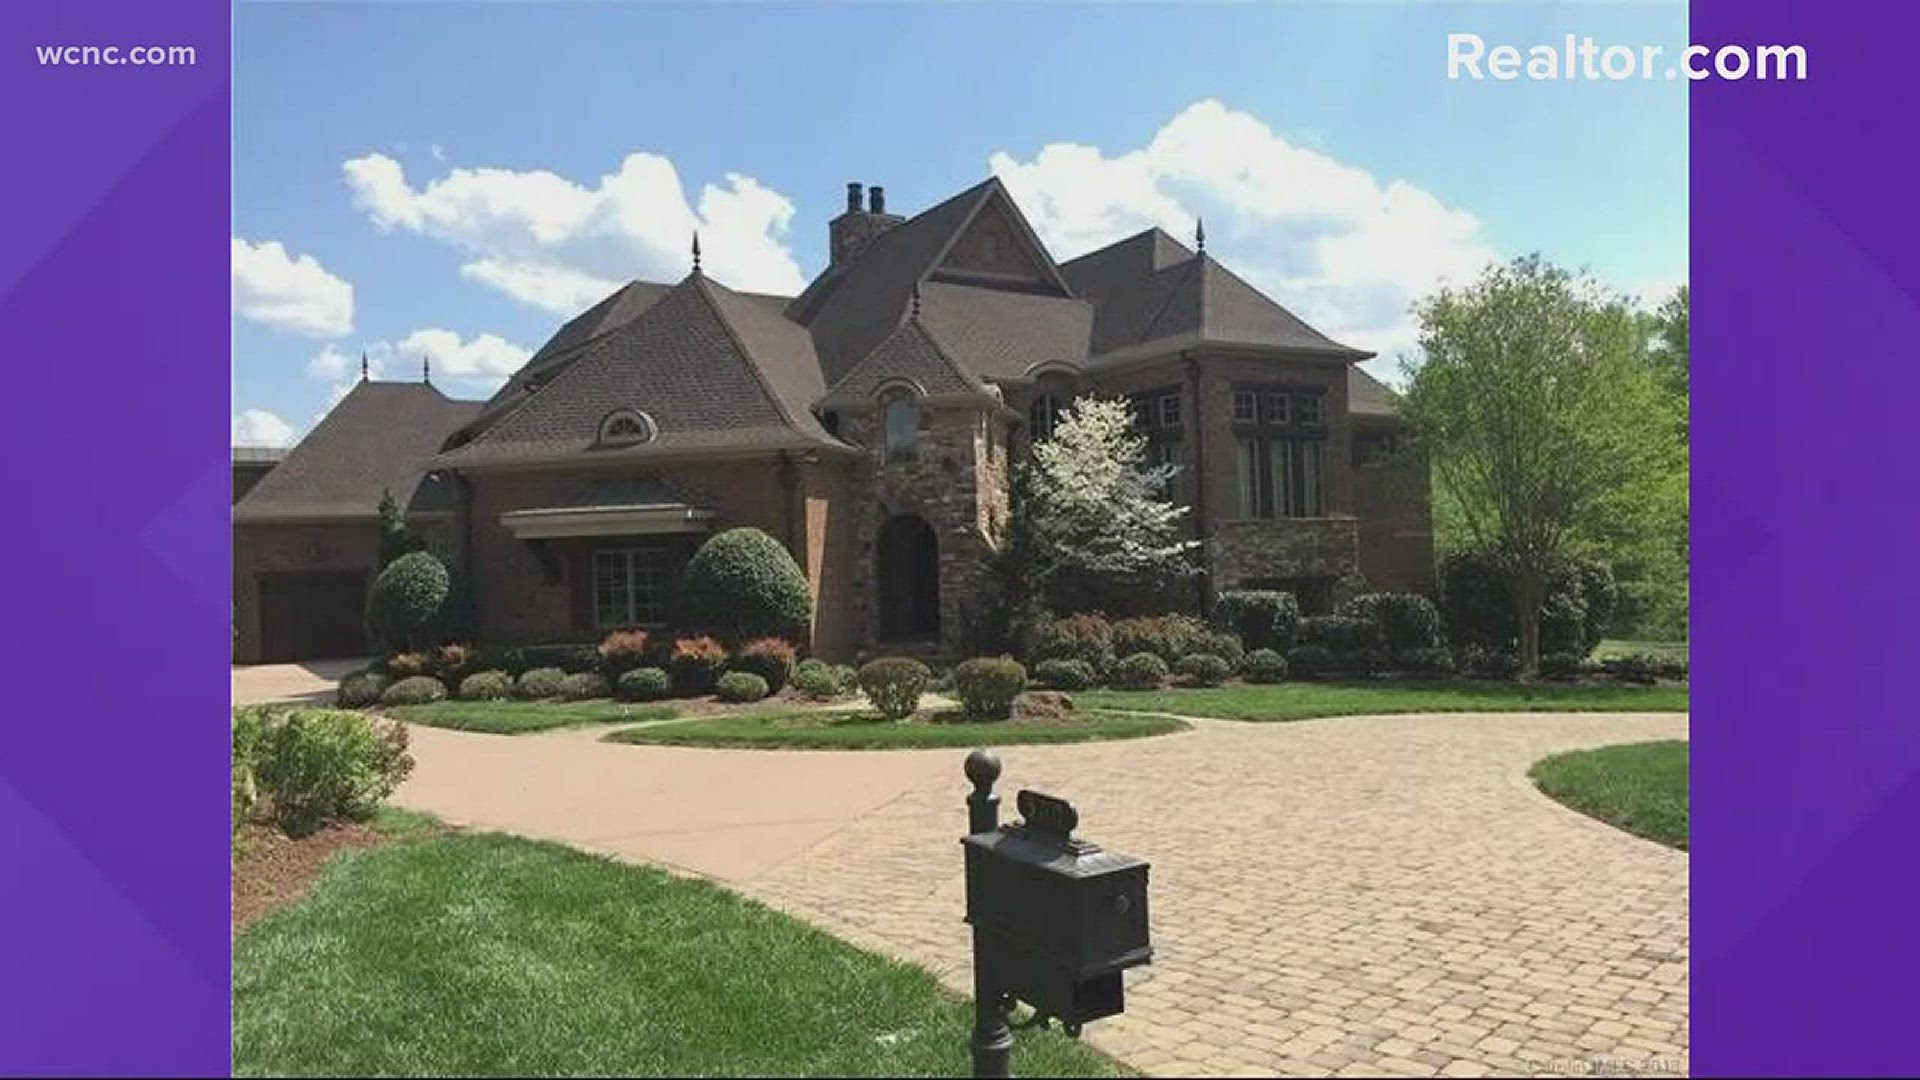 Steph Curry's Waxhaw mansion for sale